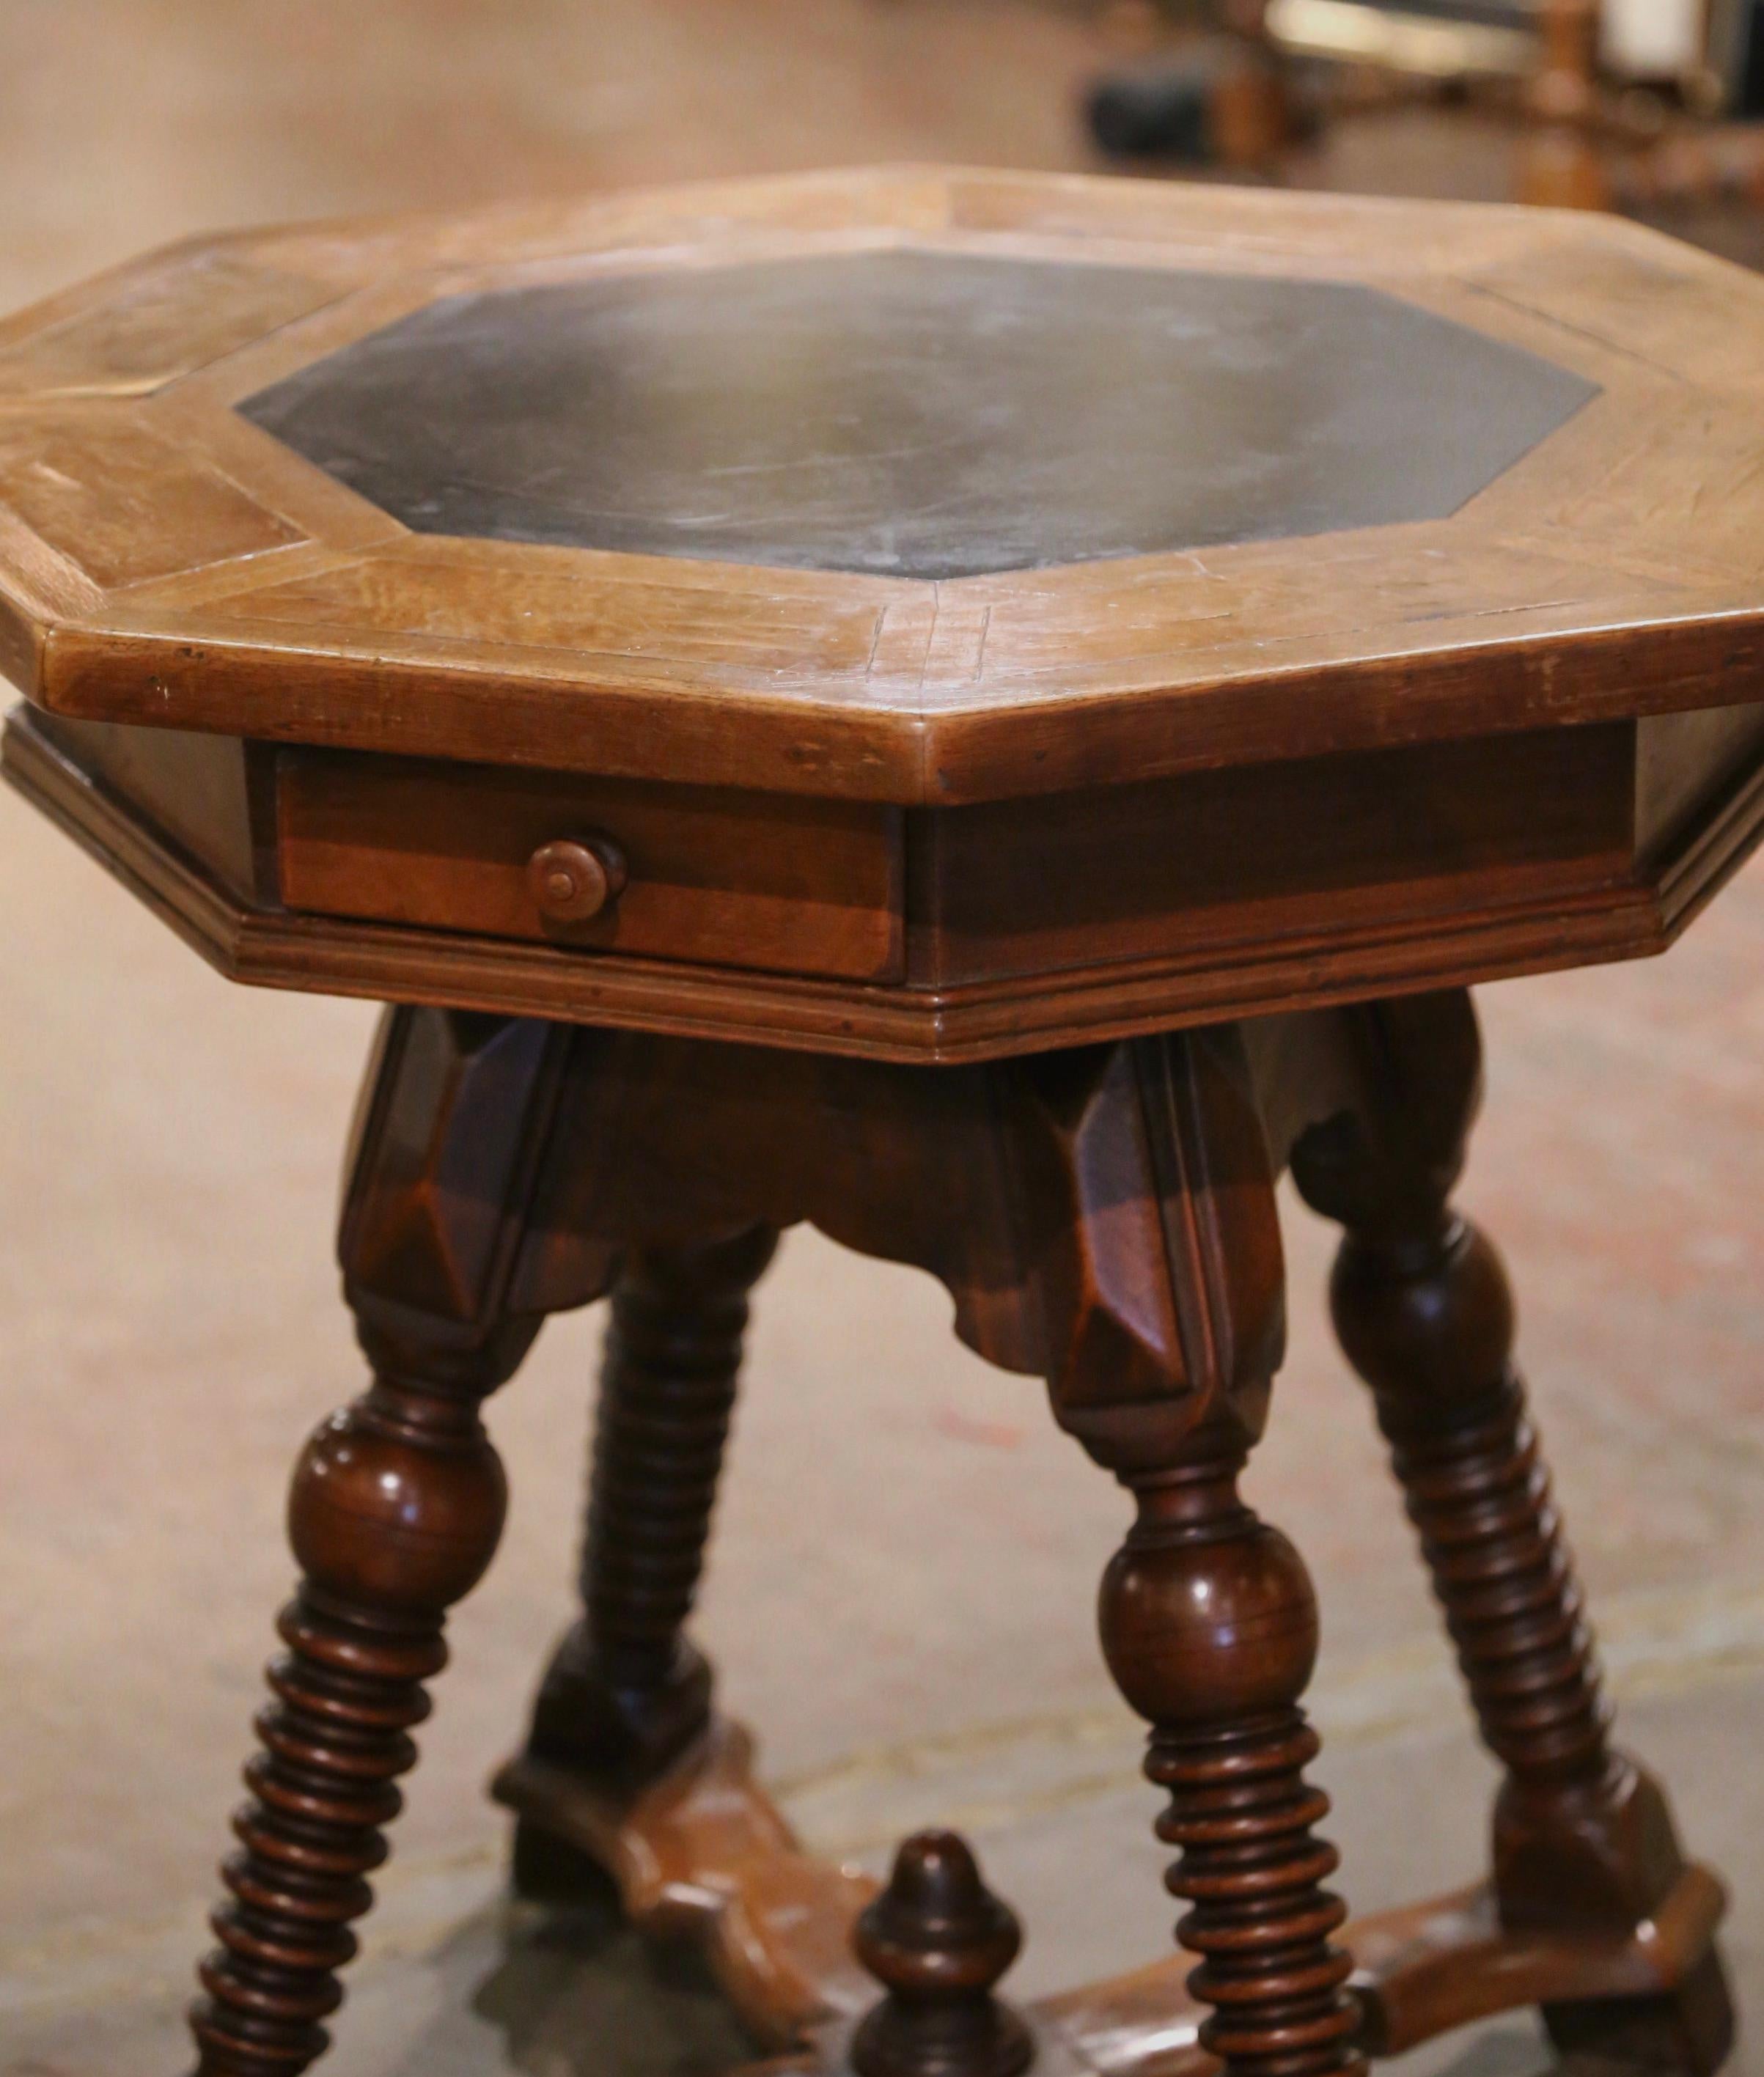 Place this interesting and detailed fruit wood table next to a couch or in a corner. Crafted in France, circa 1880, the antique side table has eight sides, a shaped apron and four turned legs connected with a four-armed stretcher across the bottom